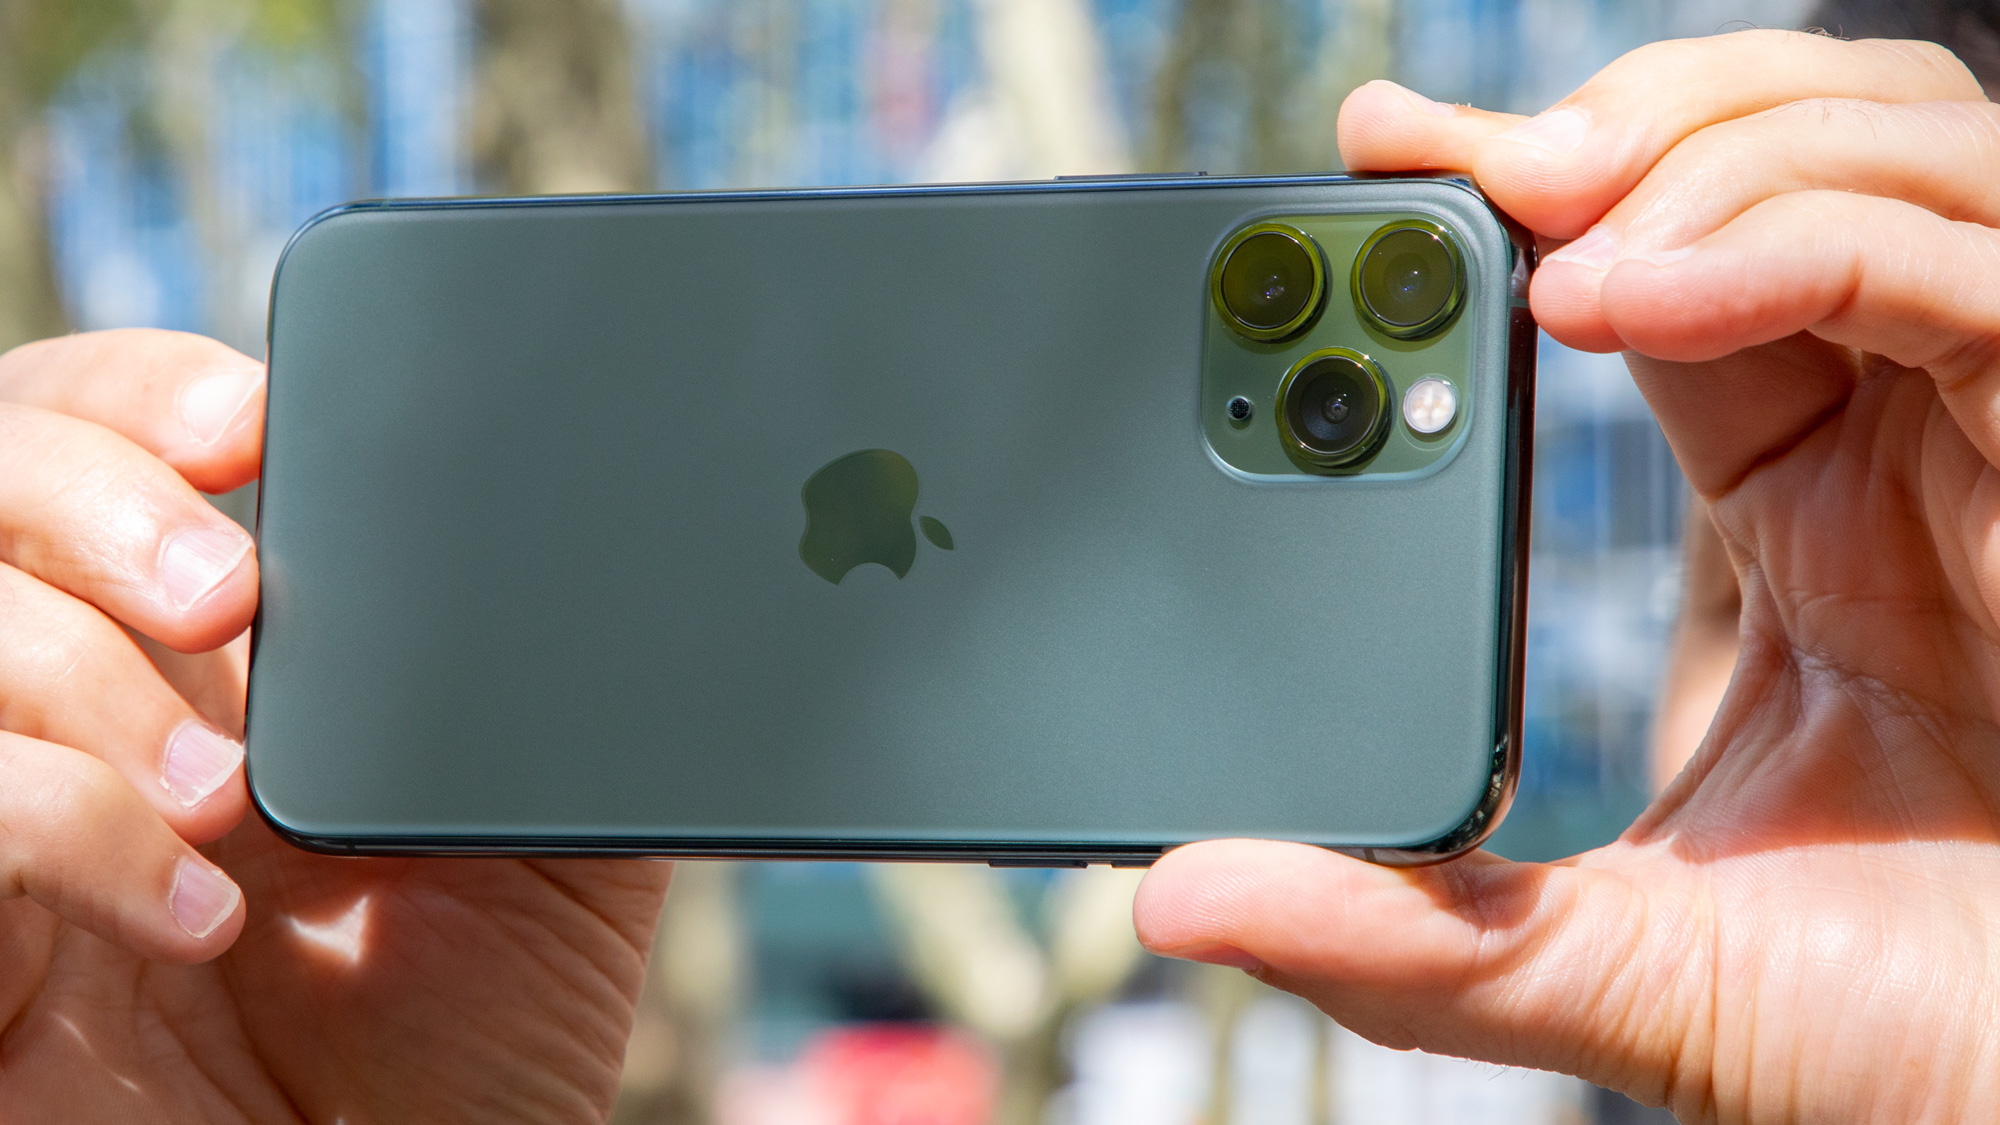 The iPhone 13's cameras will surely get a lot of attention.